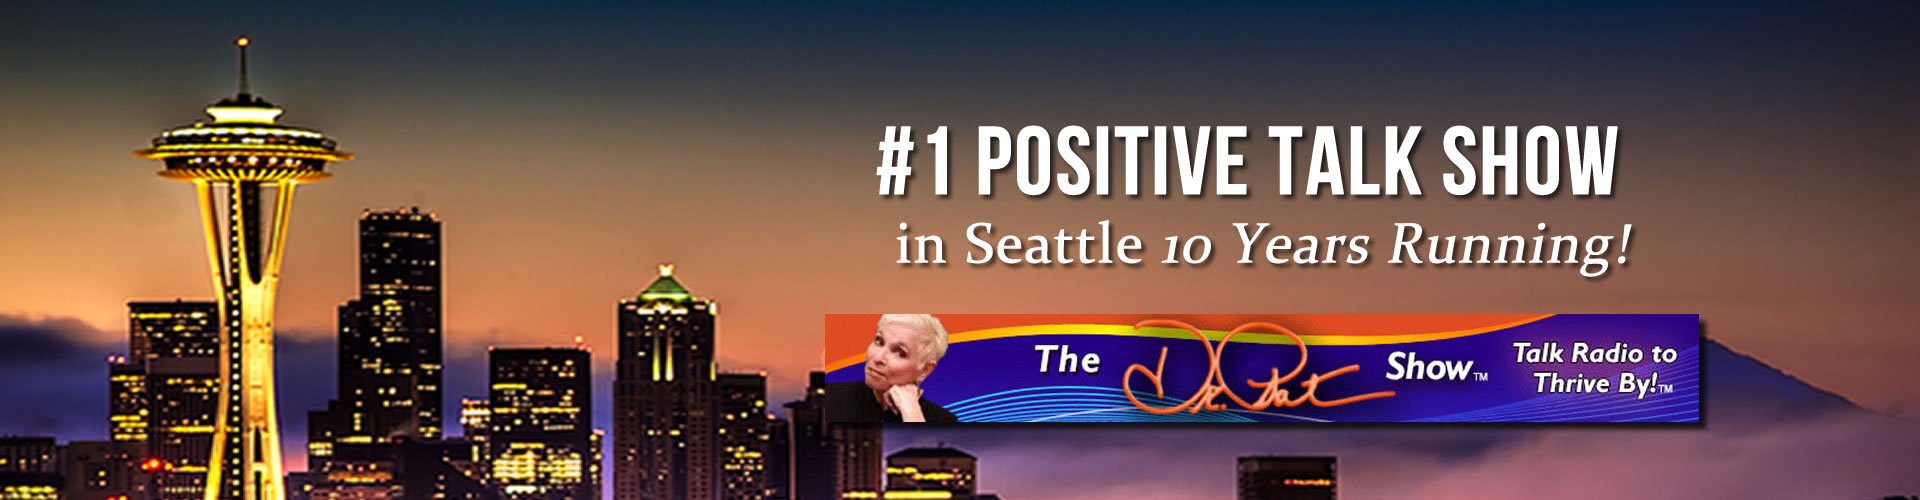 The Dr. Pat Show Number One Positive Talk Seattle